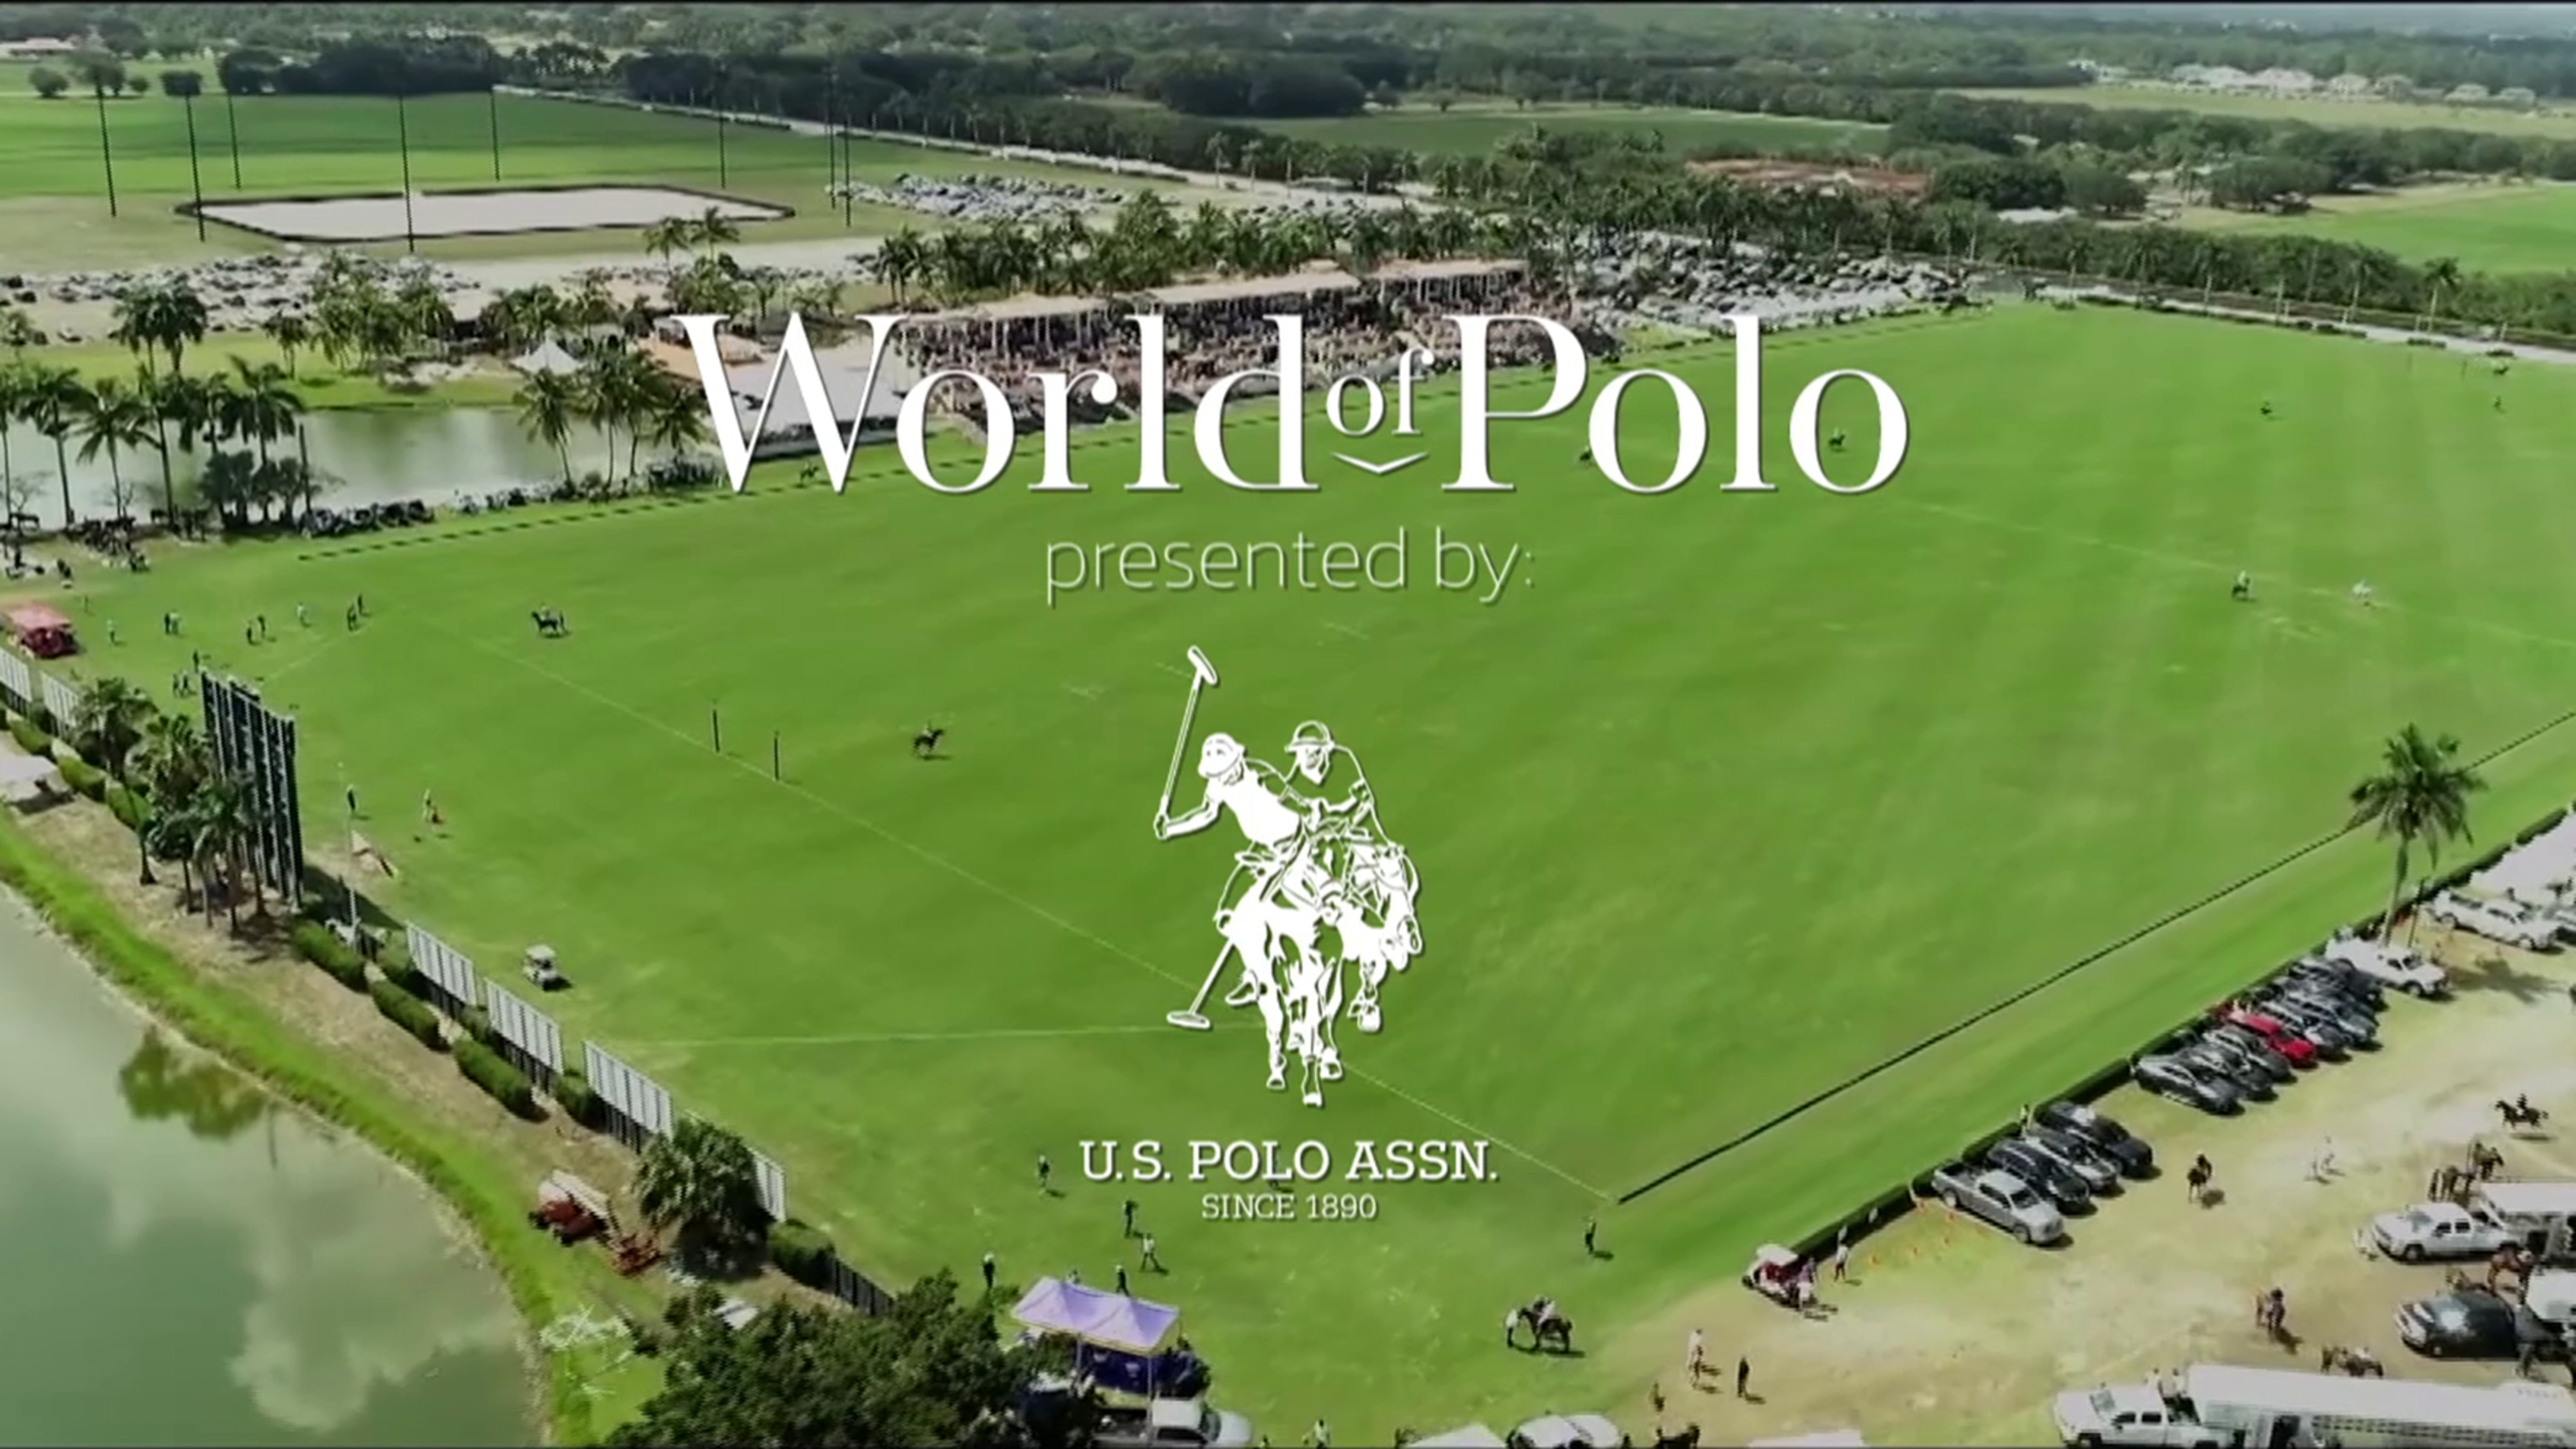 Global Polo Show presented by U.S. Polo Assn